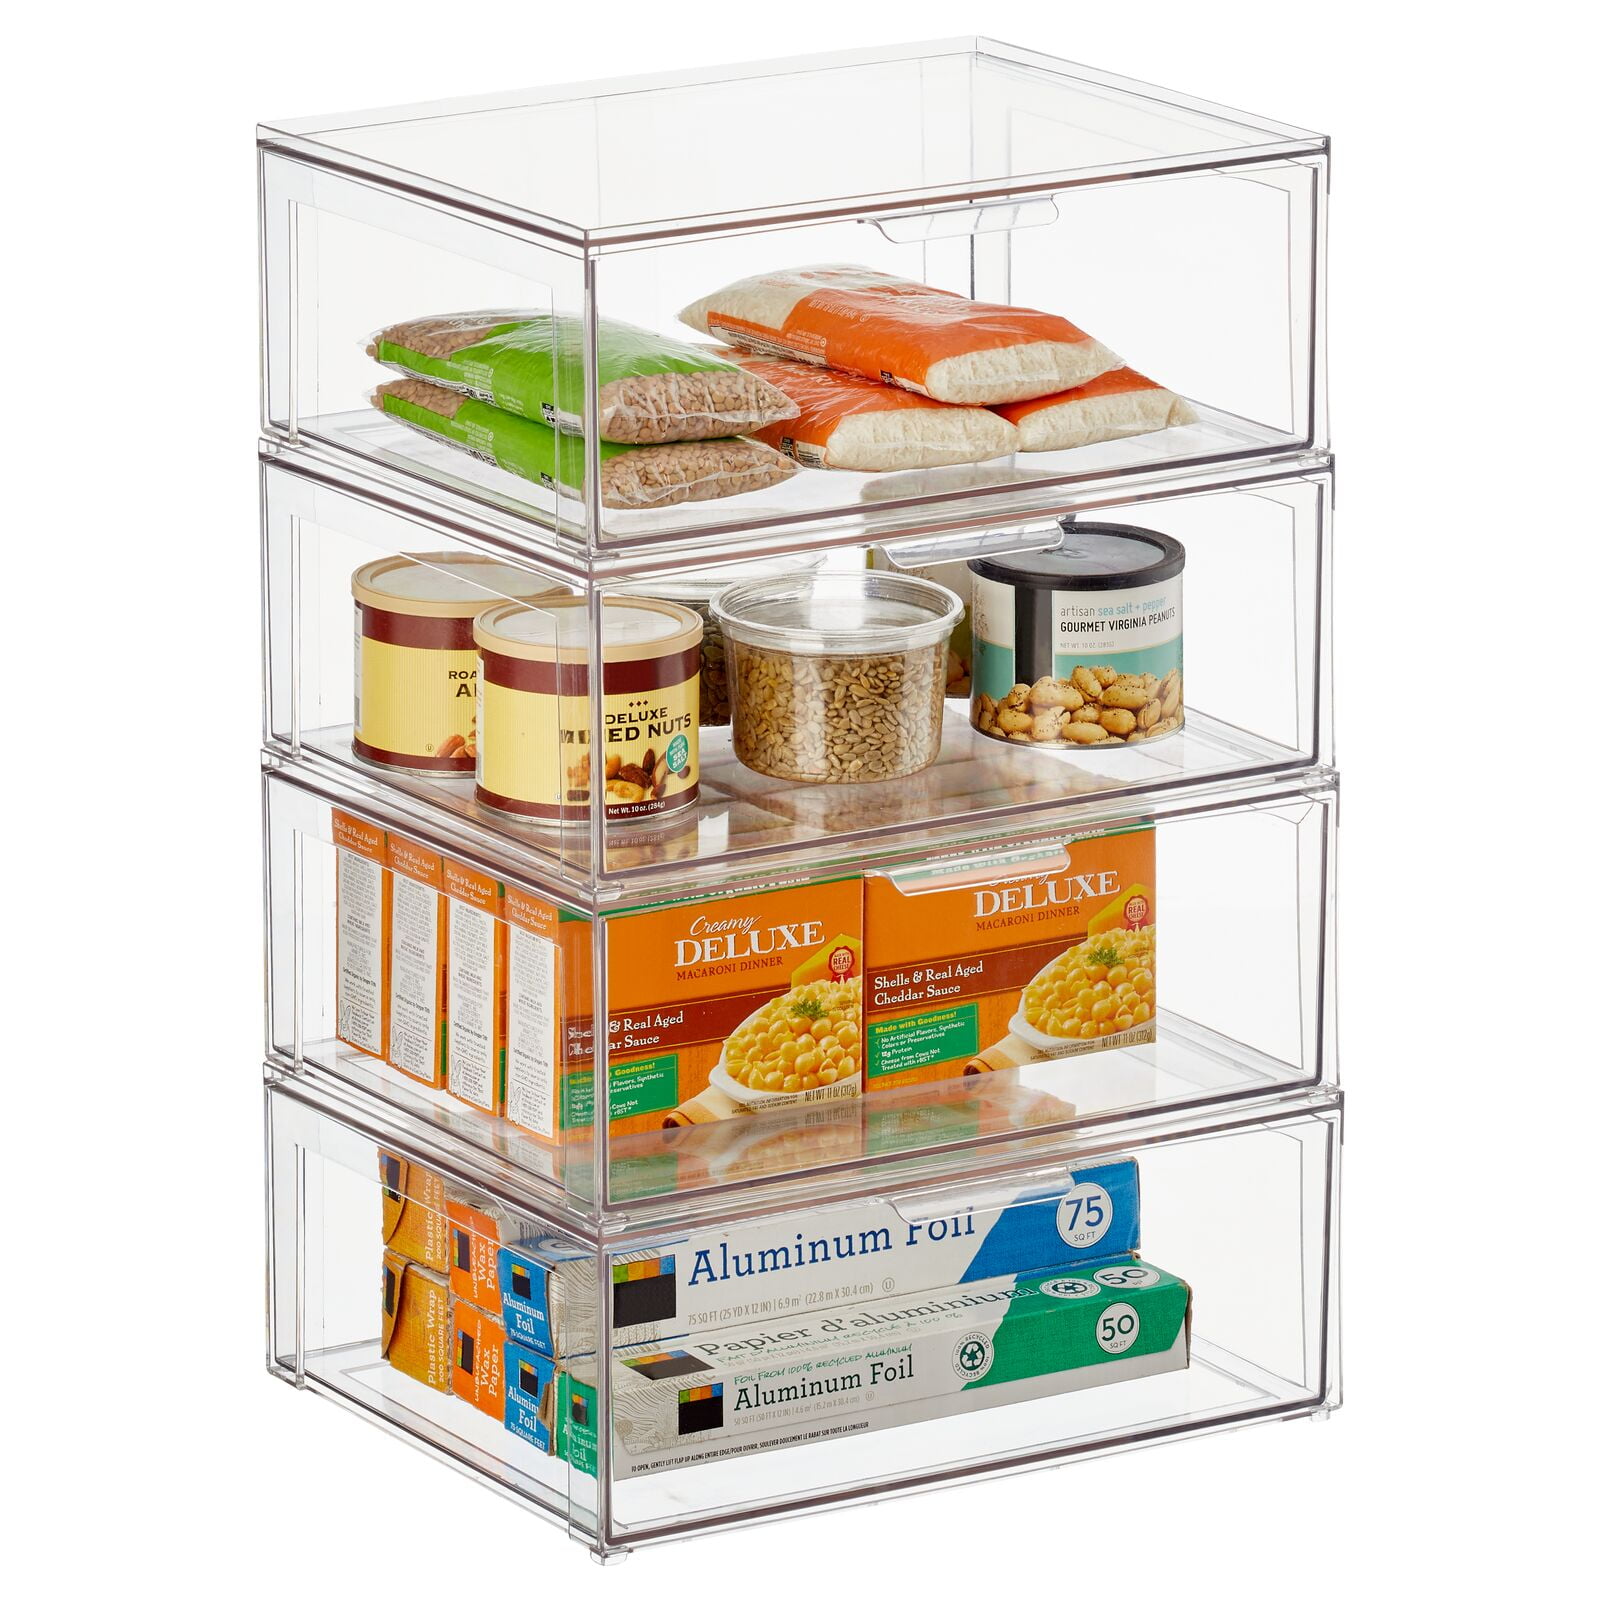 Simple Gourmet Refrigerator Organizer Storage Bins, Set of 6. Stackable  Clear Plastic Containers for Fridge, Pantry, and